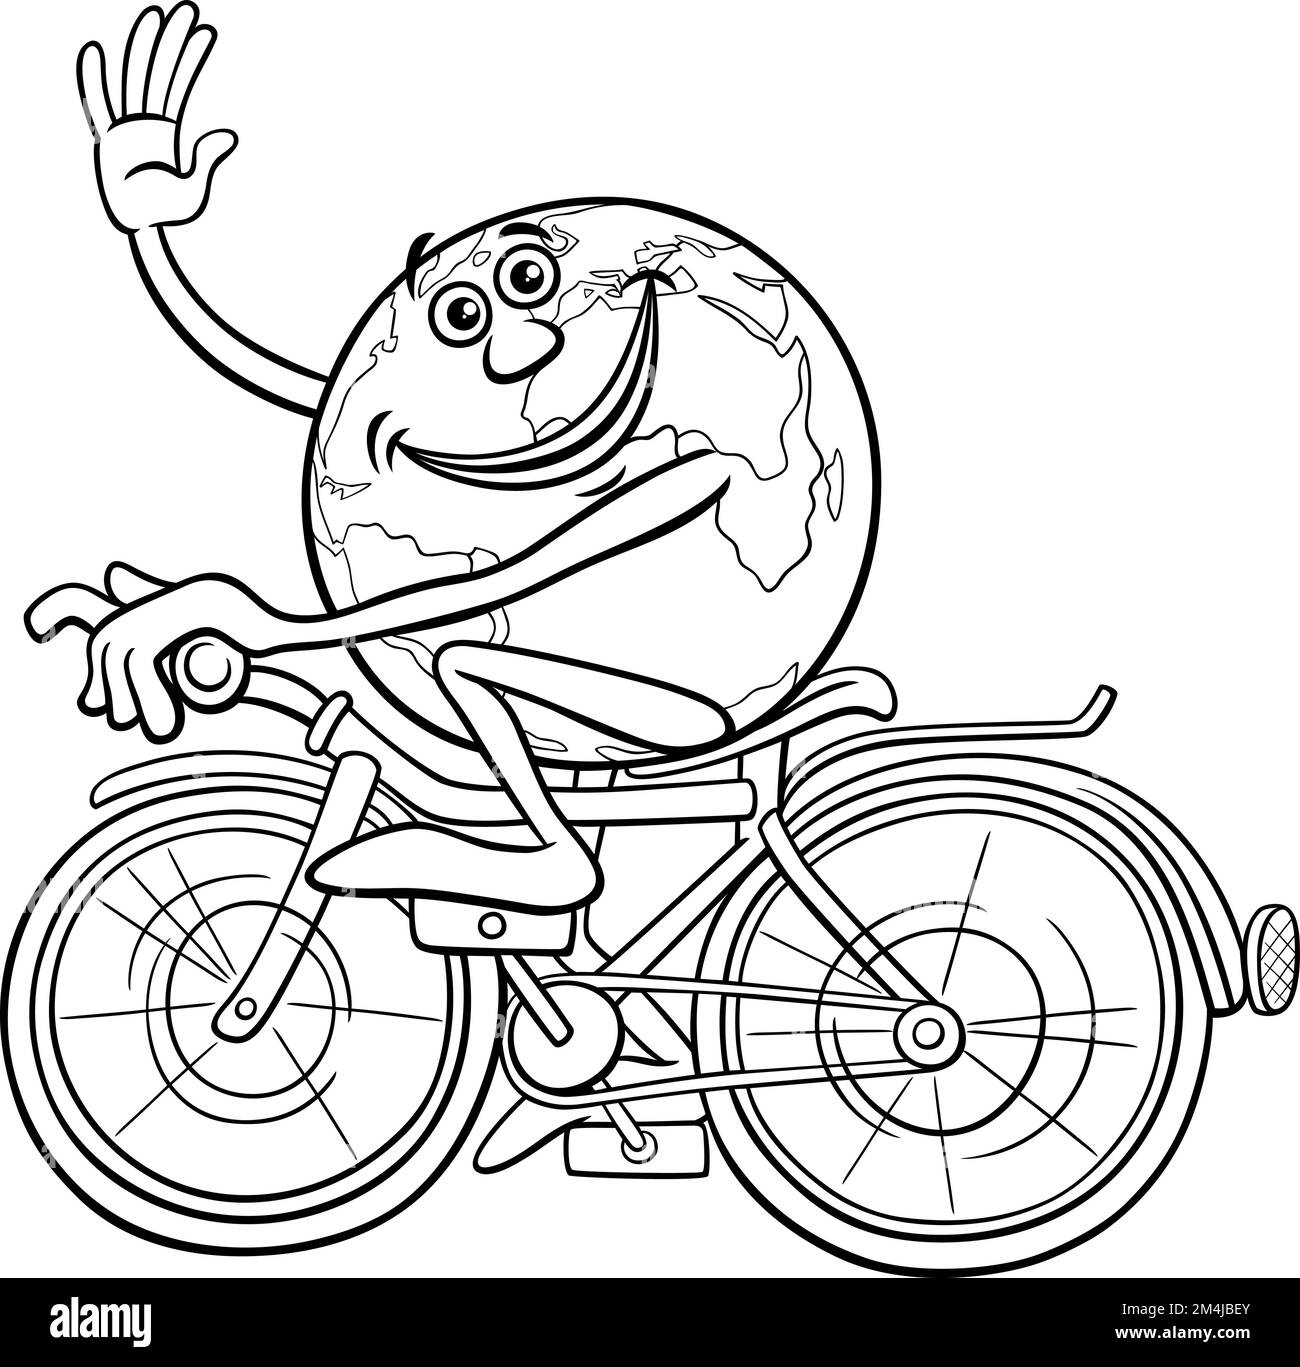 Black and white cartoon illustration of Earth character riding a bicycle coloring page Stock Vector